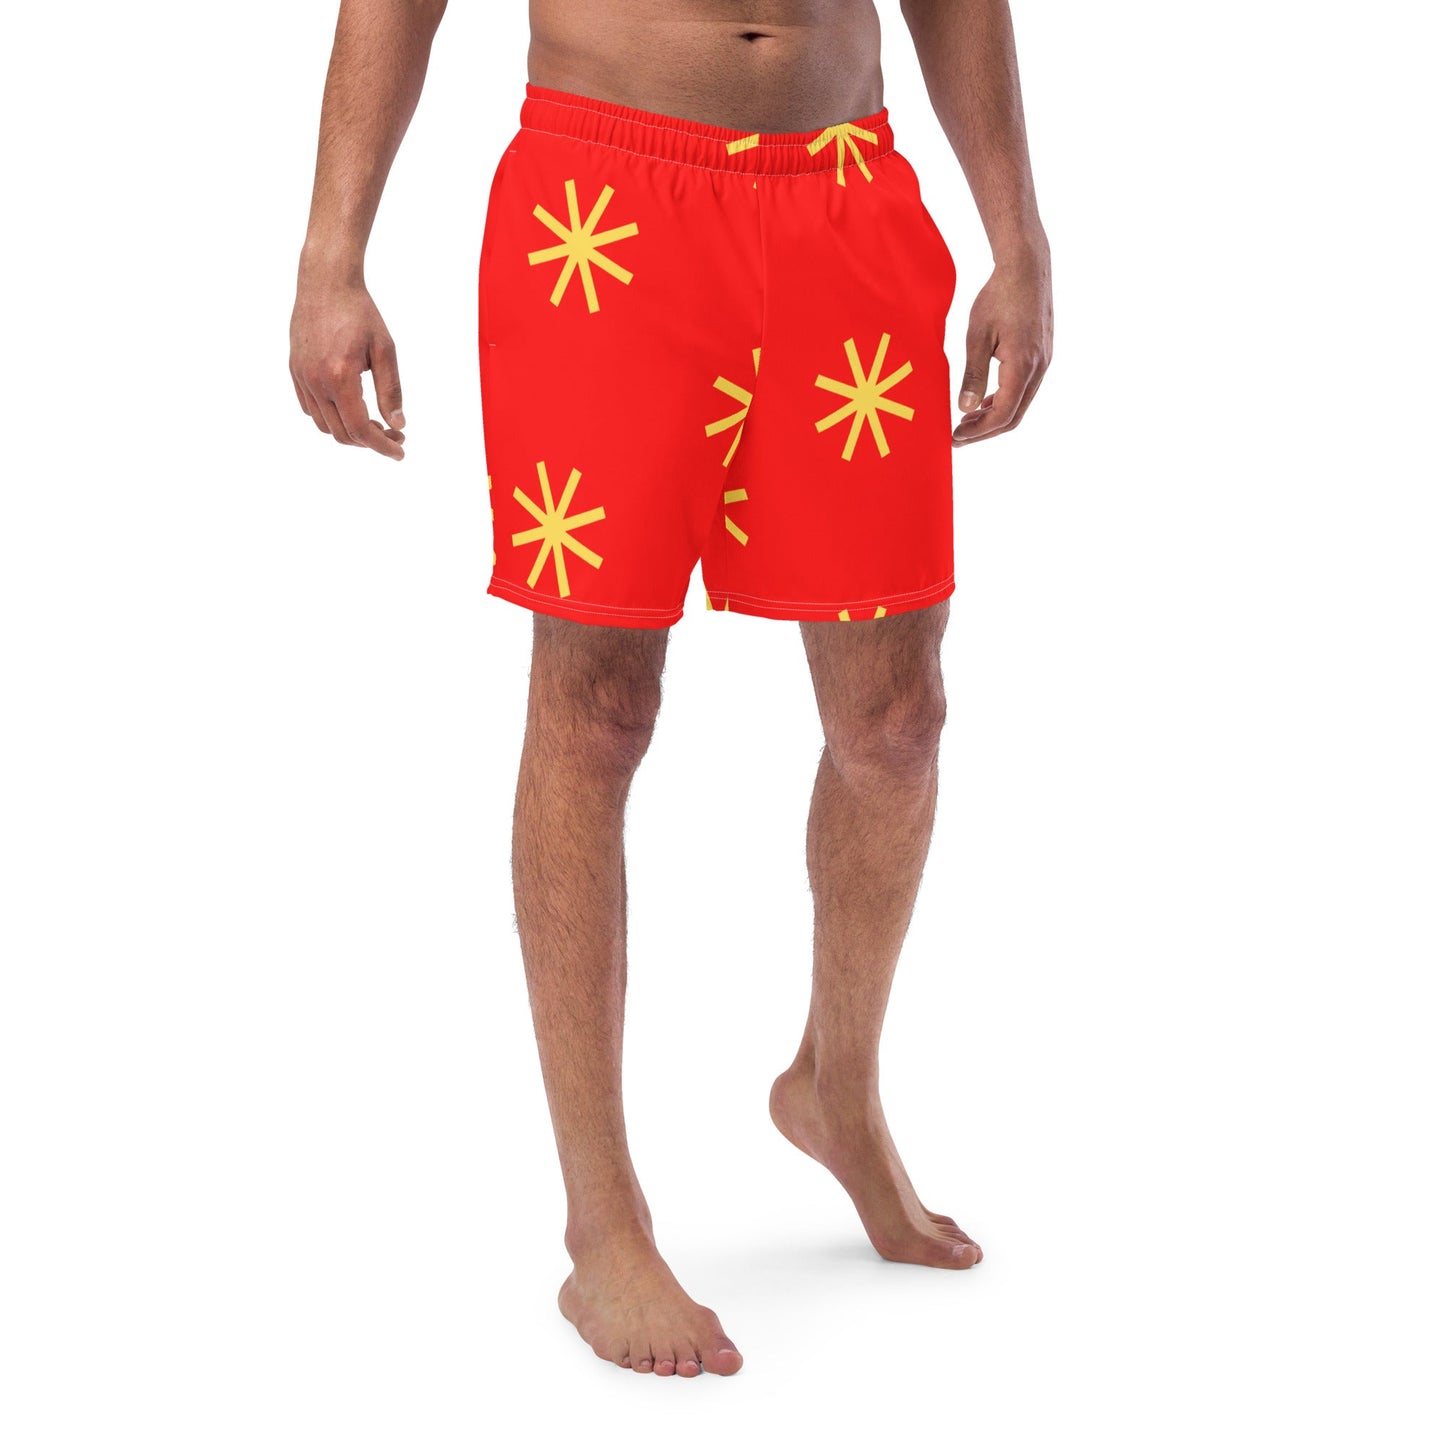 The Chip Men's swim trunks castaway caychip and dalechip costume#tag4##tag5##tag6#